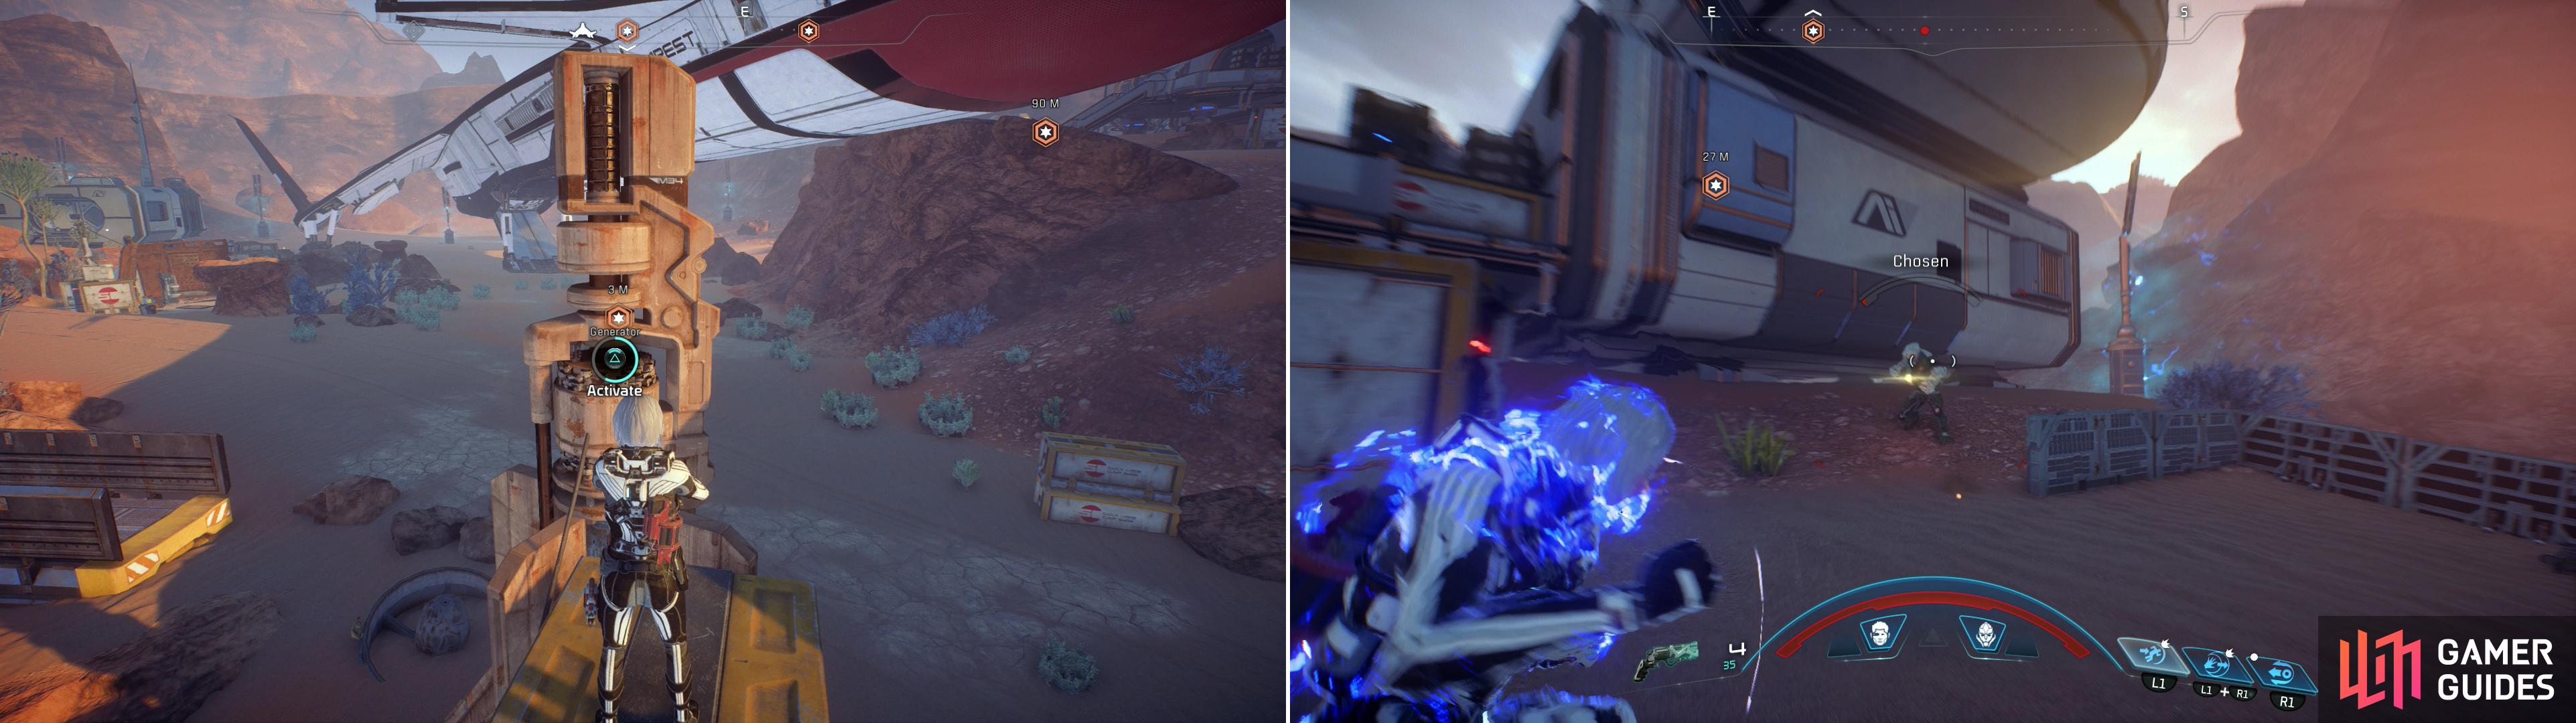 Activate Generators to restore the power (left) then fend off the Kett lured by the activity (right).